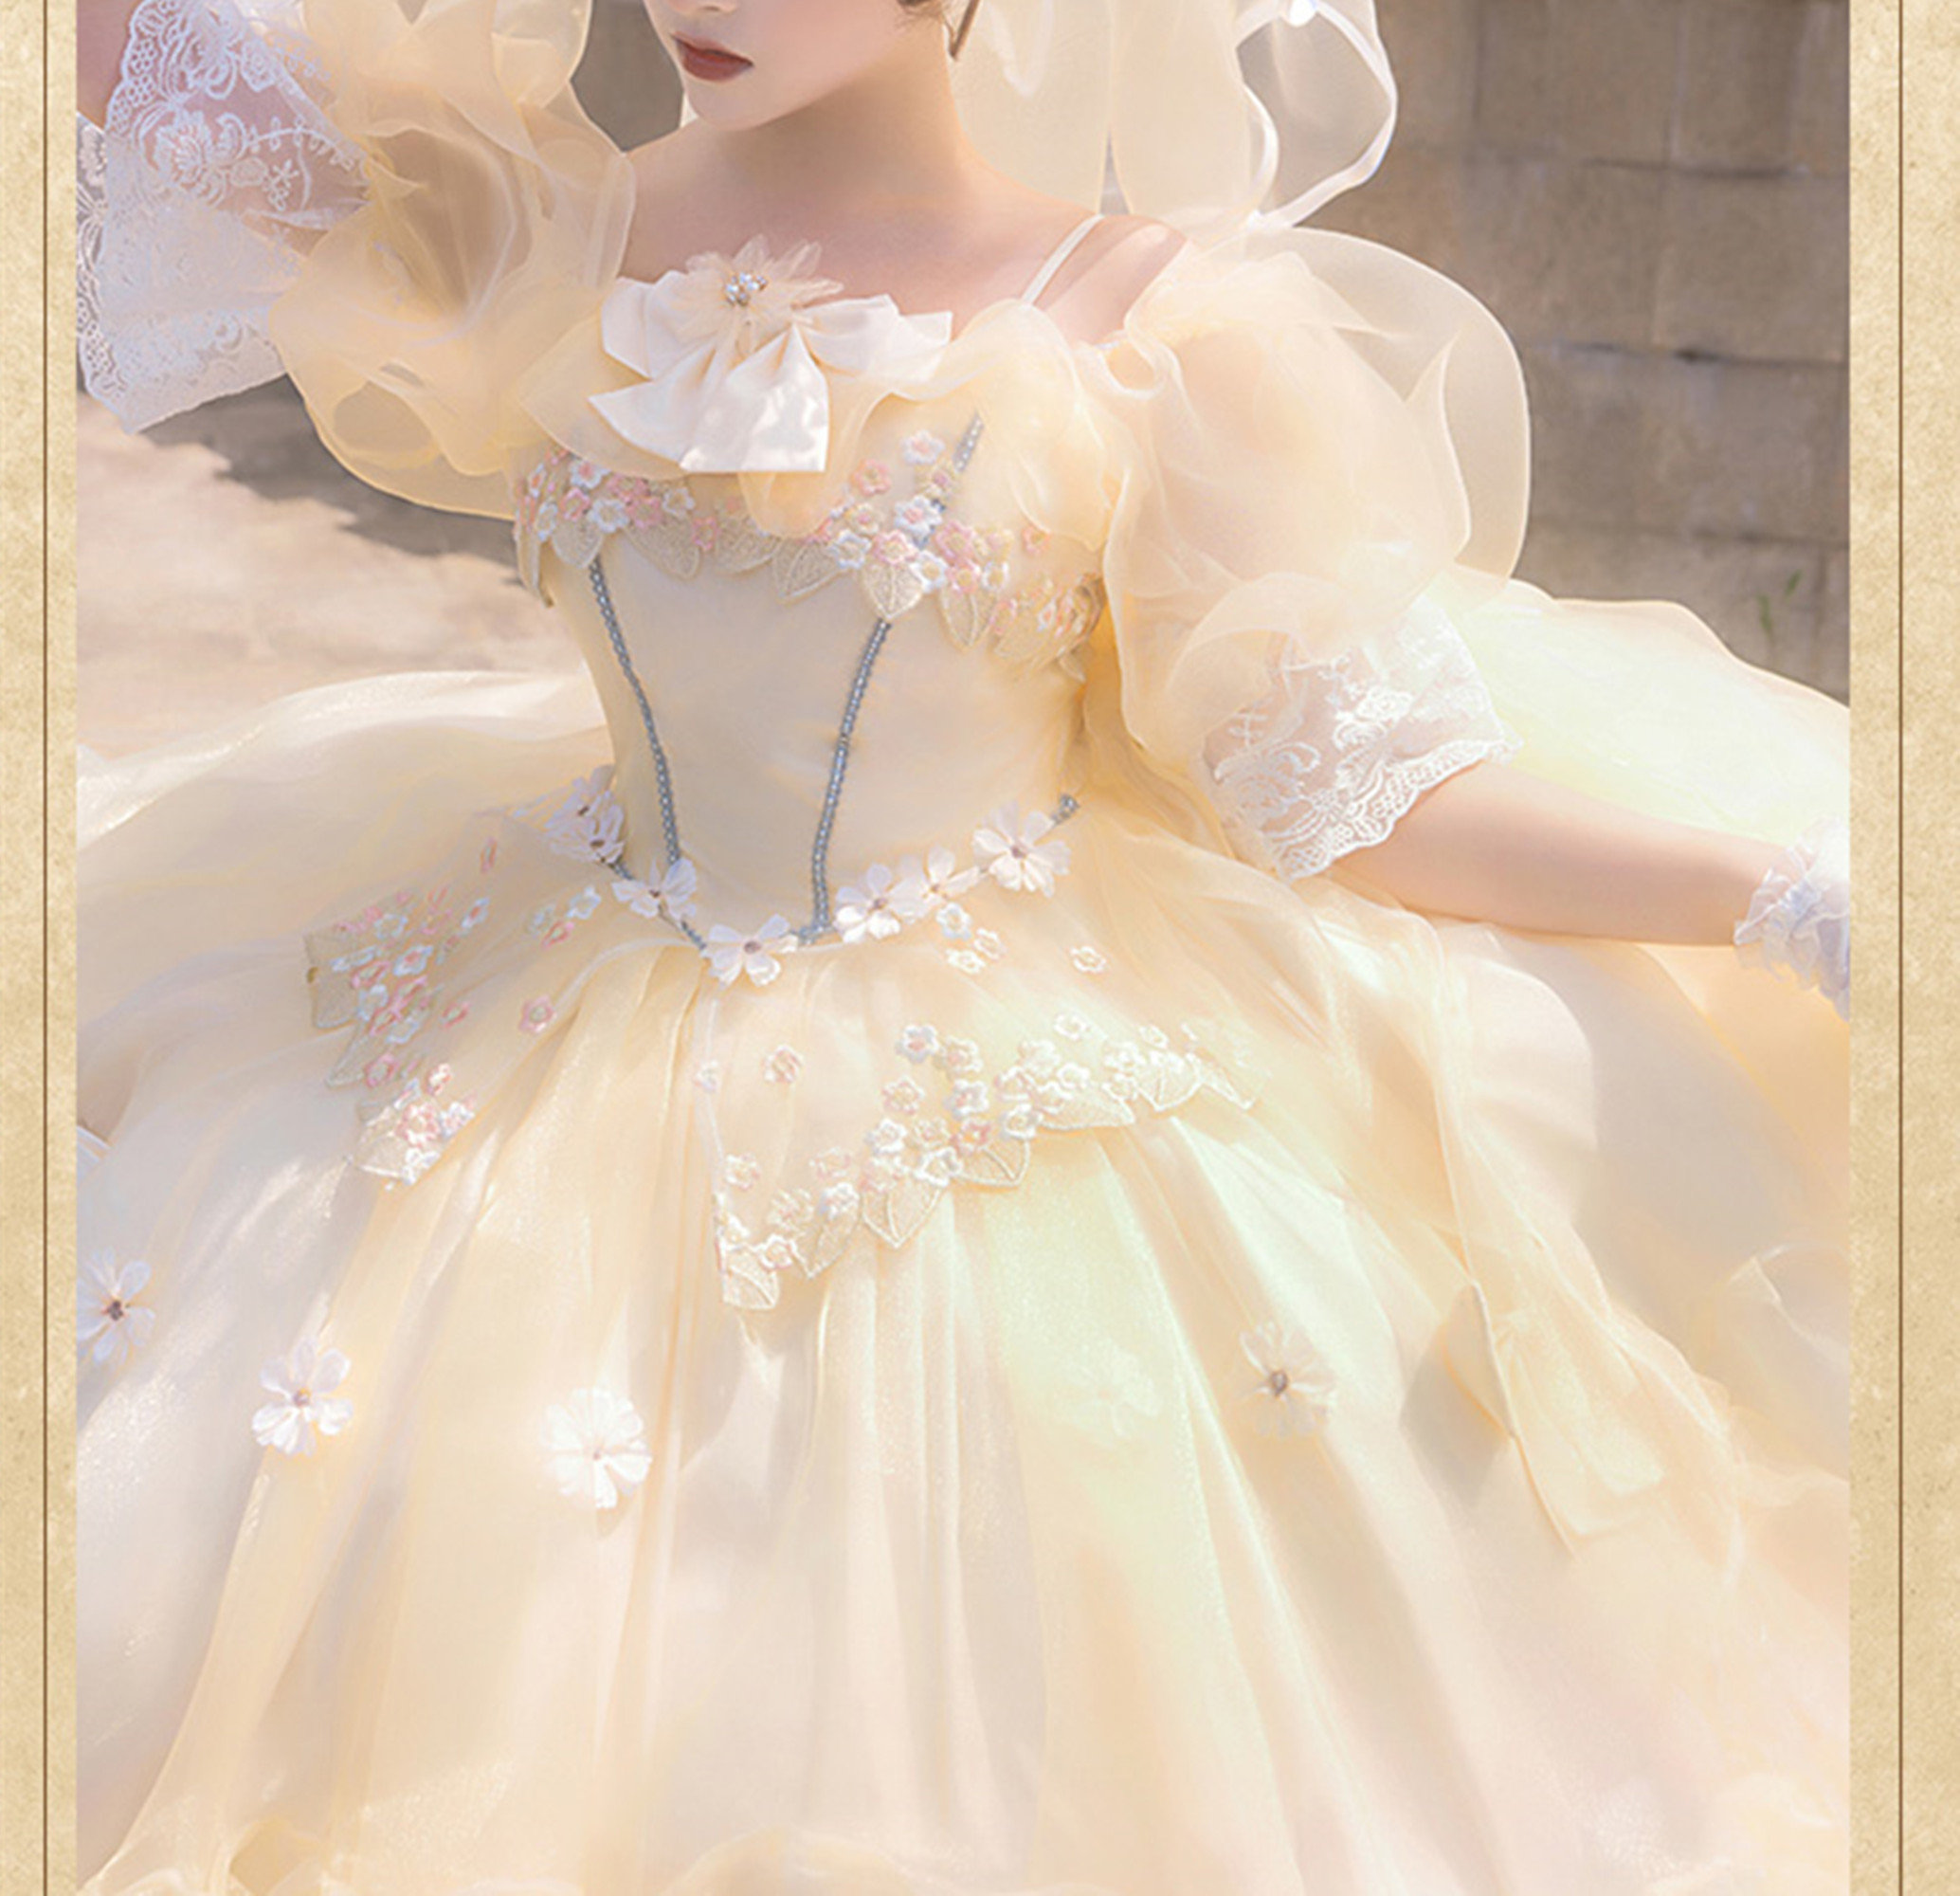 Yellow Lace Dress - Y2K Fairy Tale Princess Style